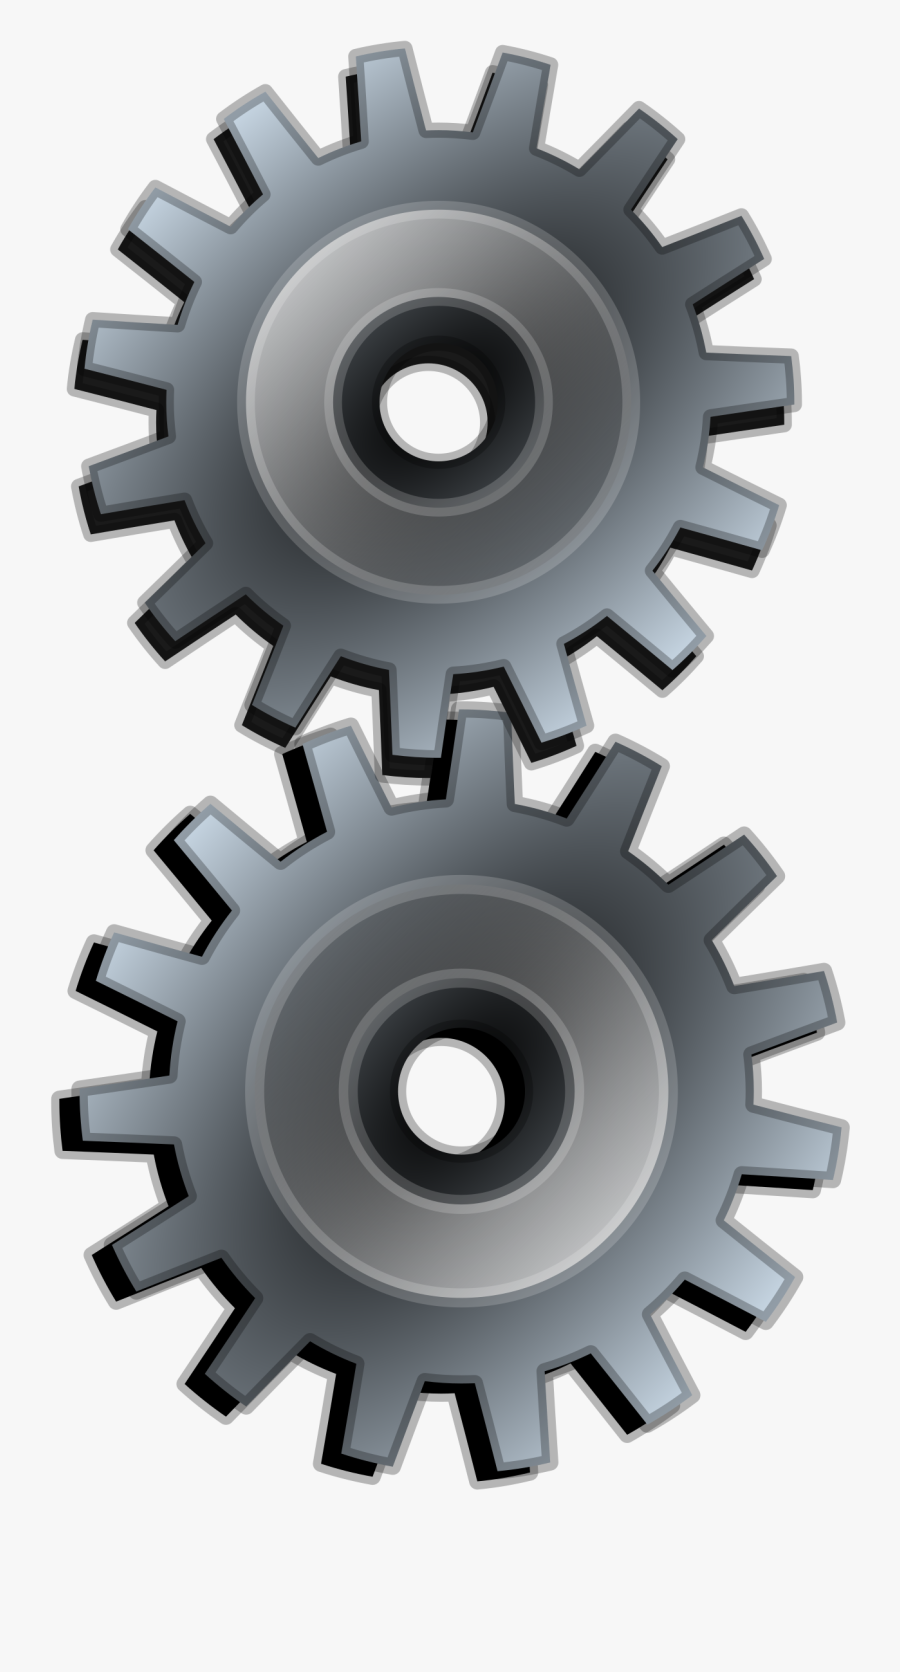 Two Gears Gray - 3 D Gears Transparent, Transparent Clipart